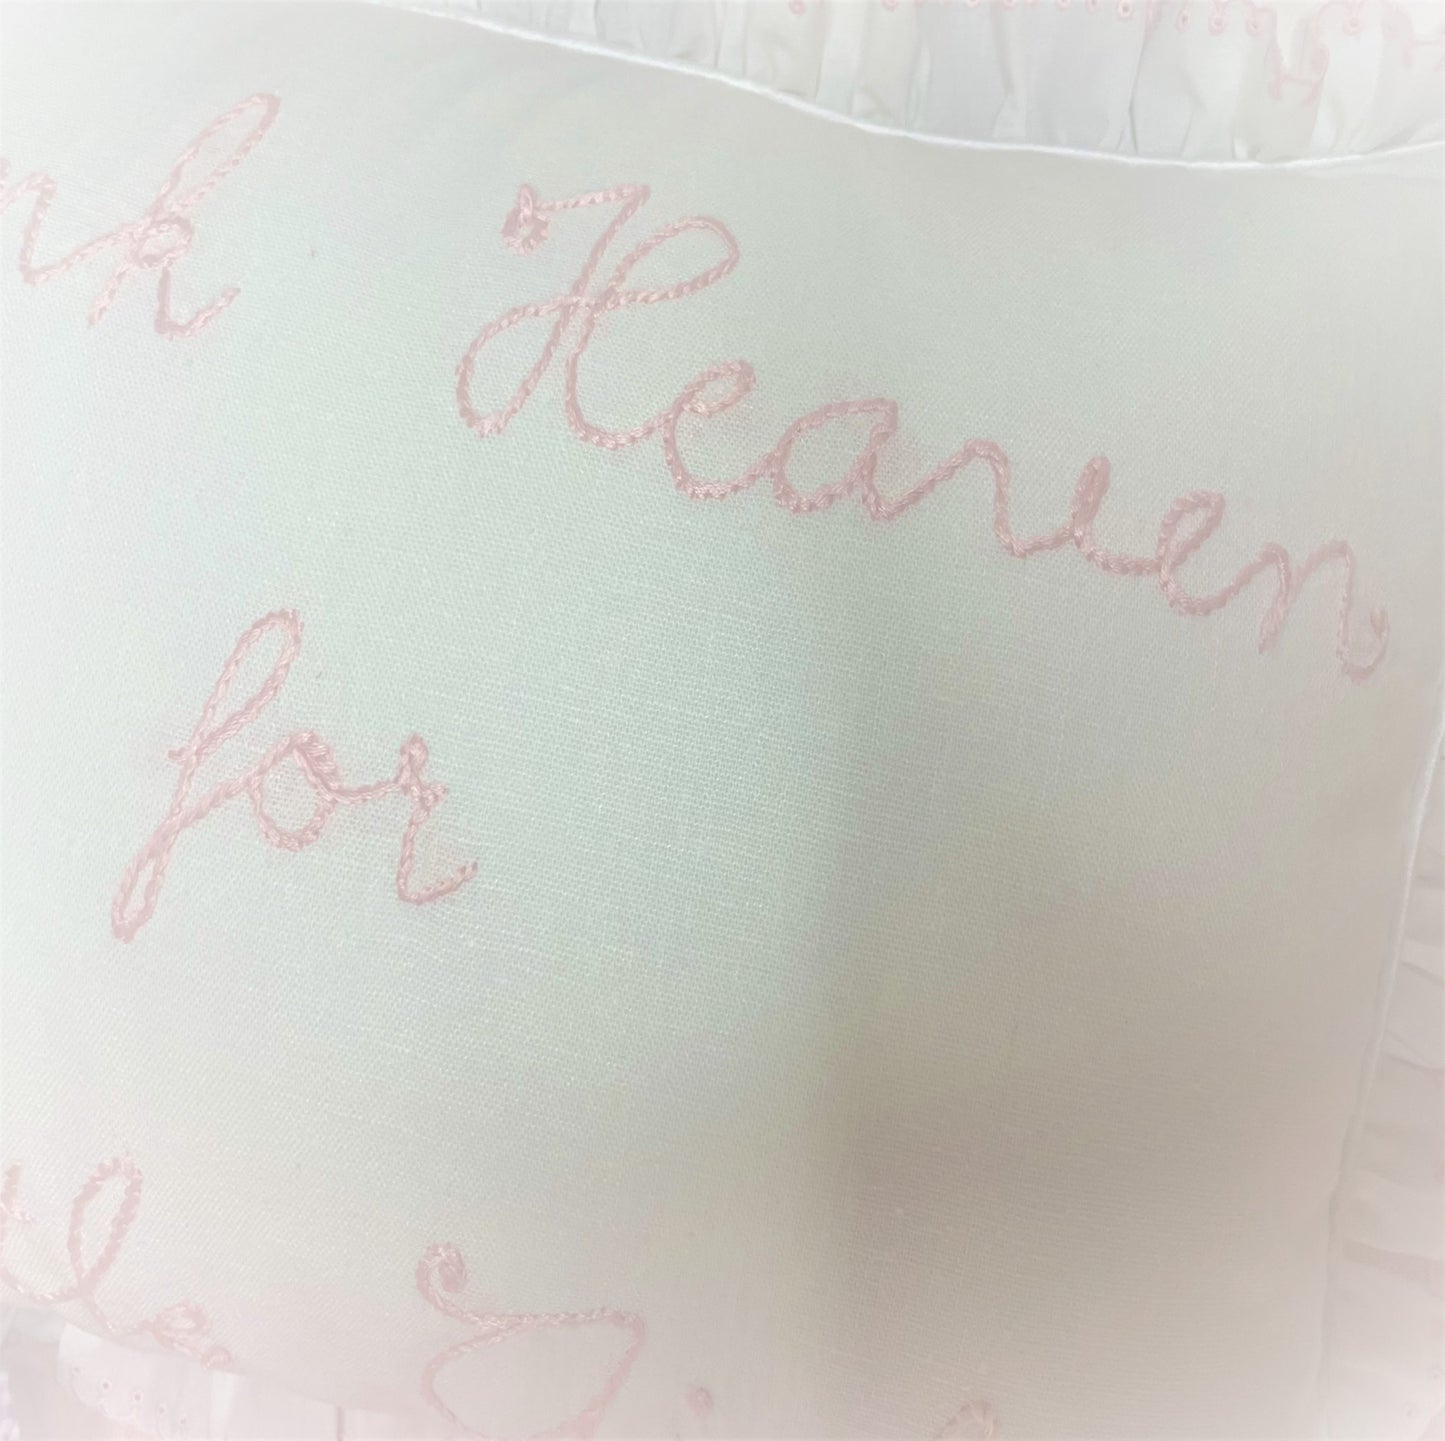 Hand-Embroidered : "Thank Heaven for..."